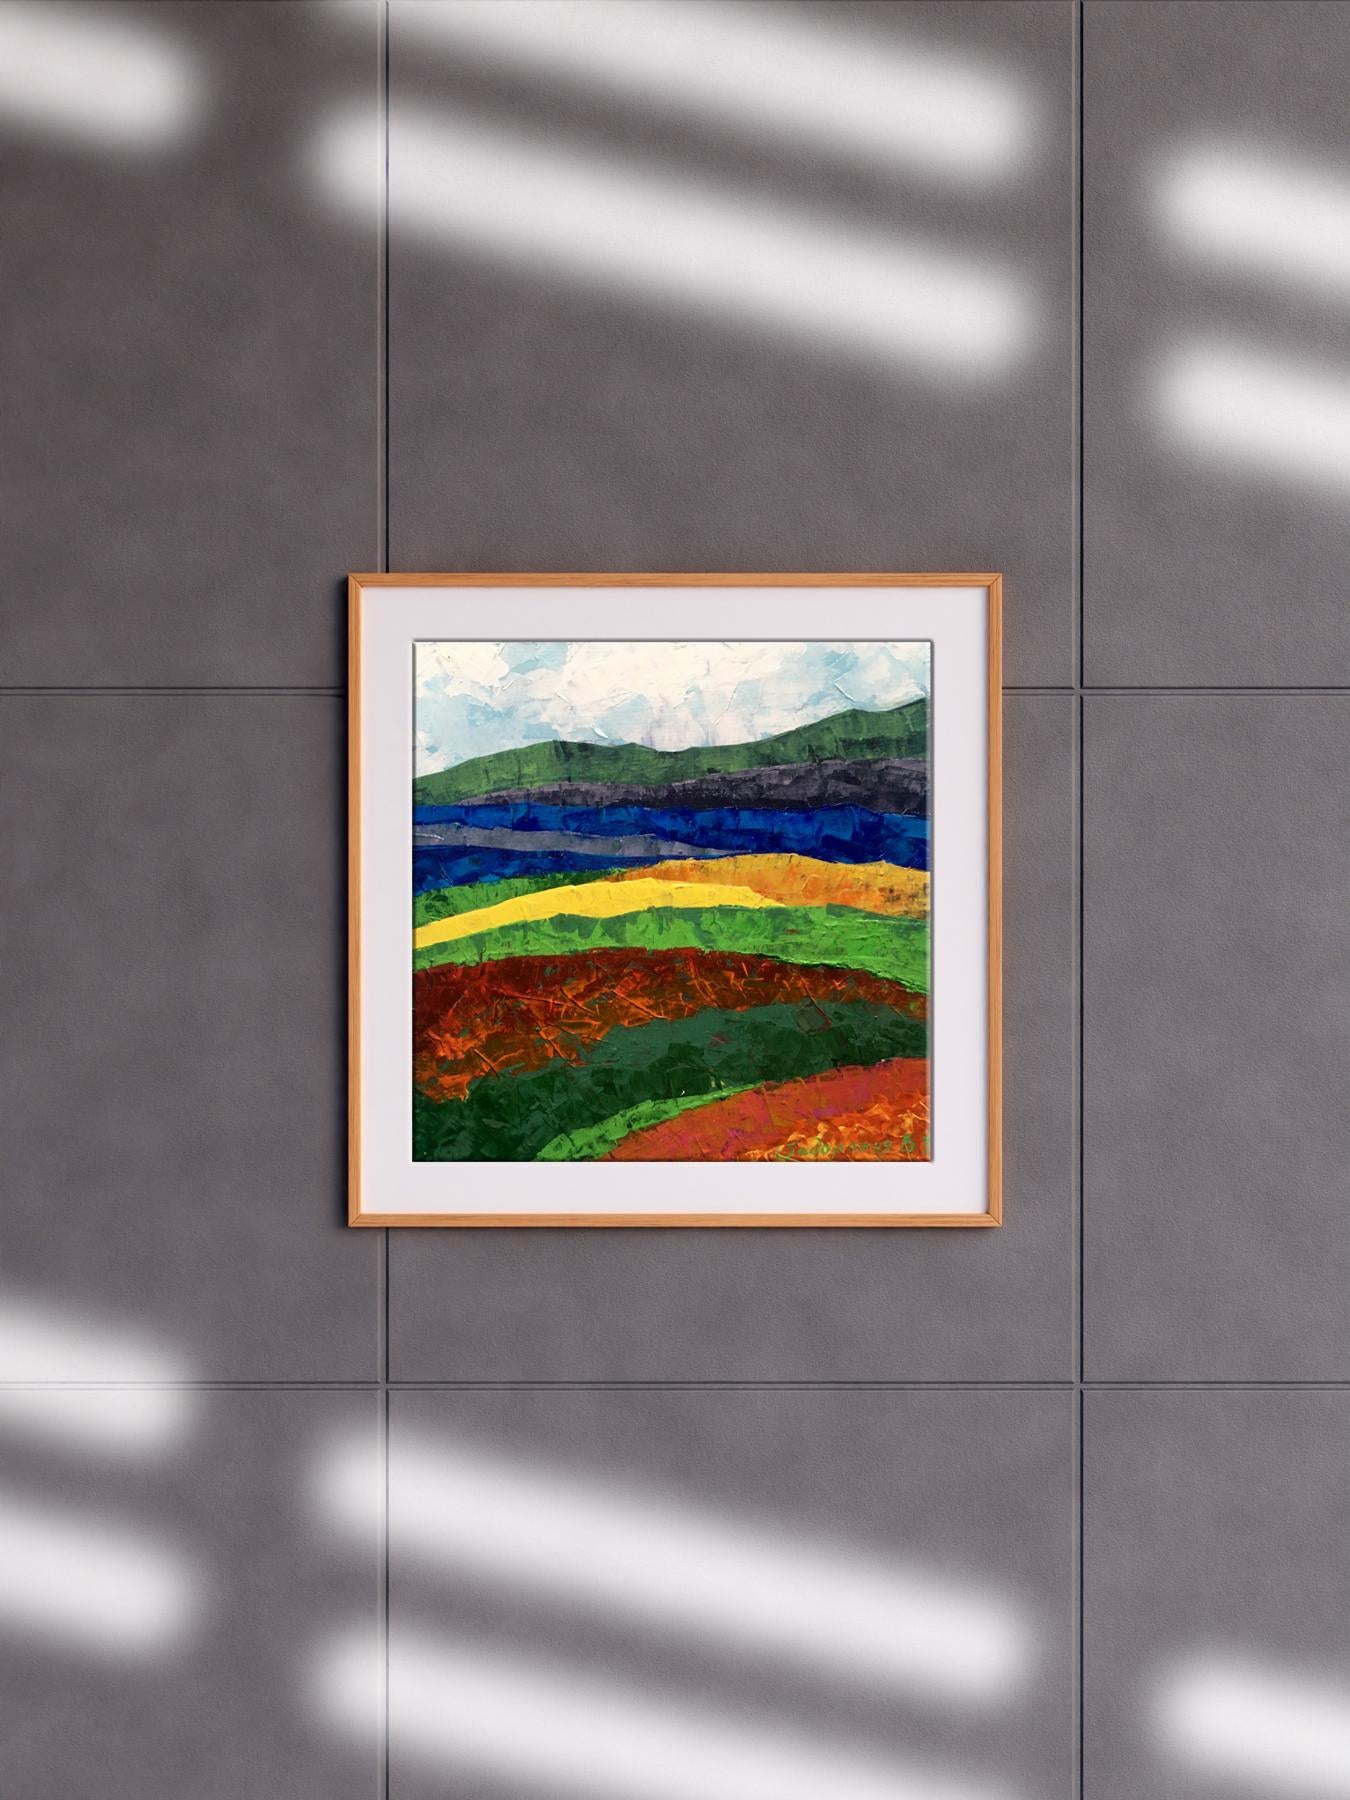 Oil painting depicting "Mountain Colored Fields" by V. Zadorozhnya